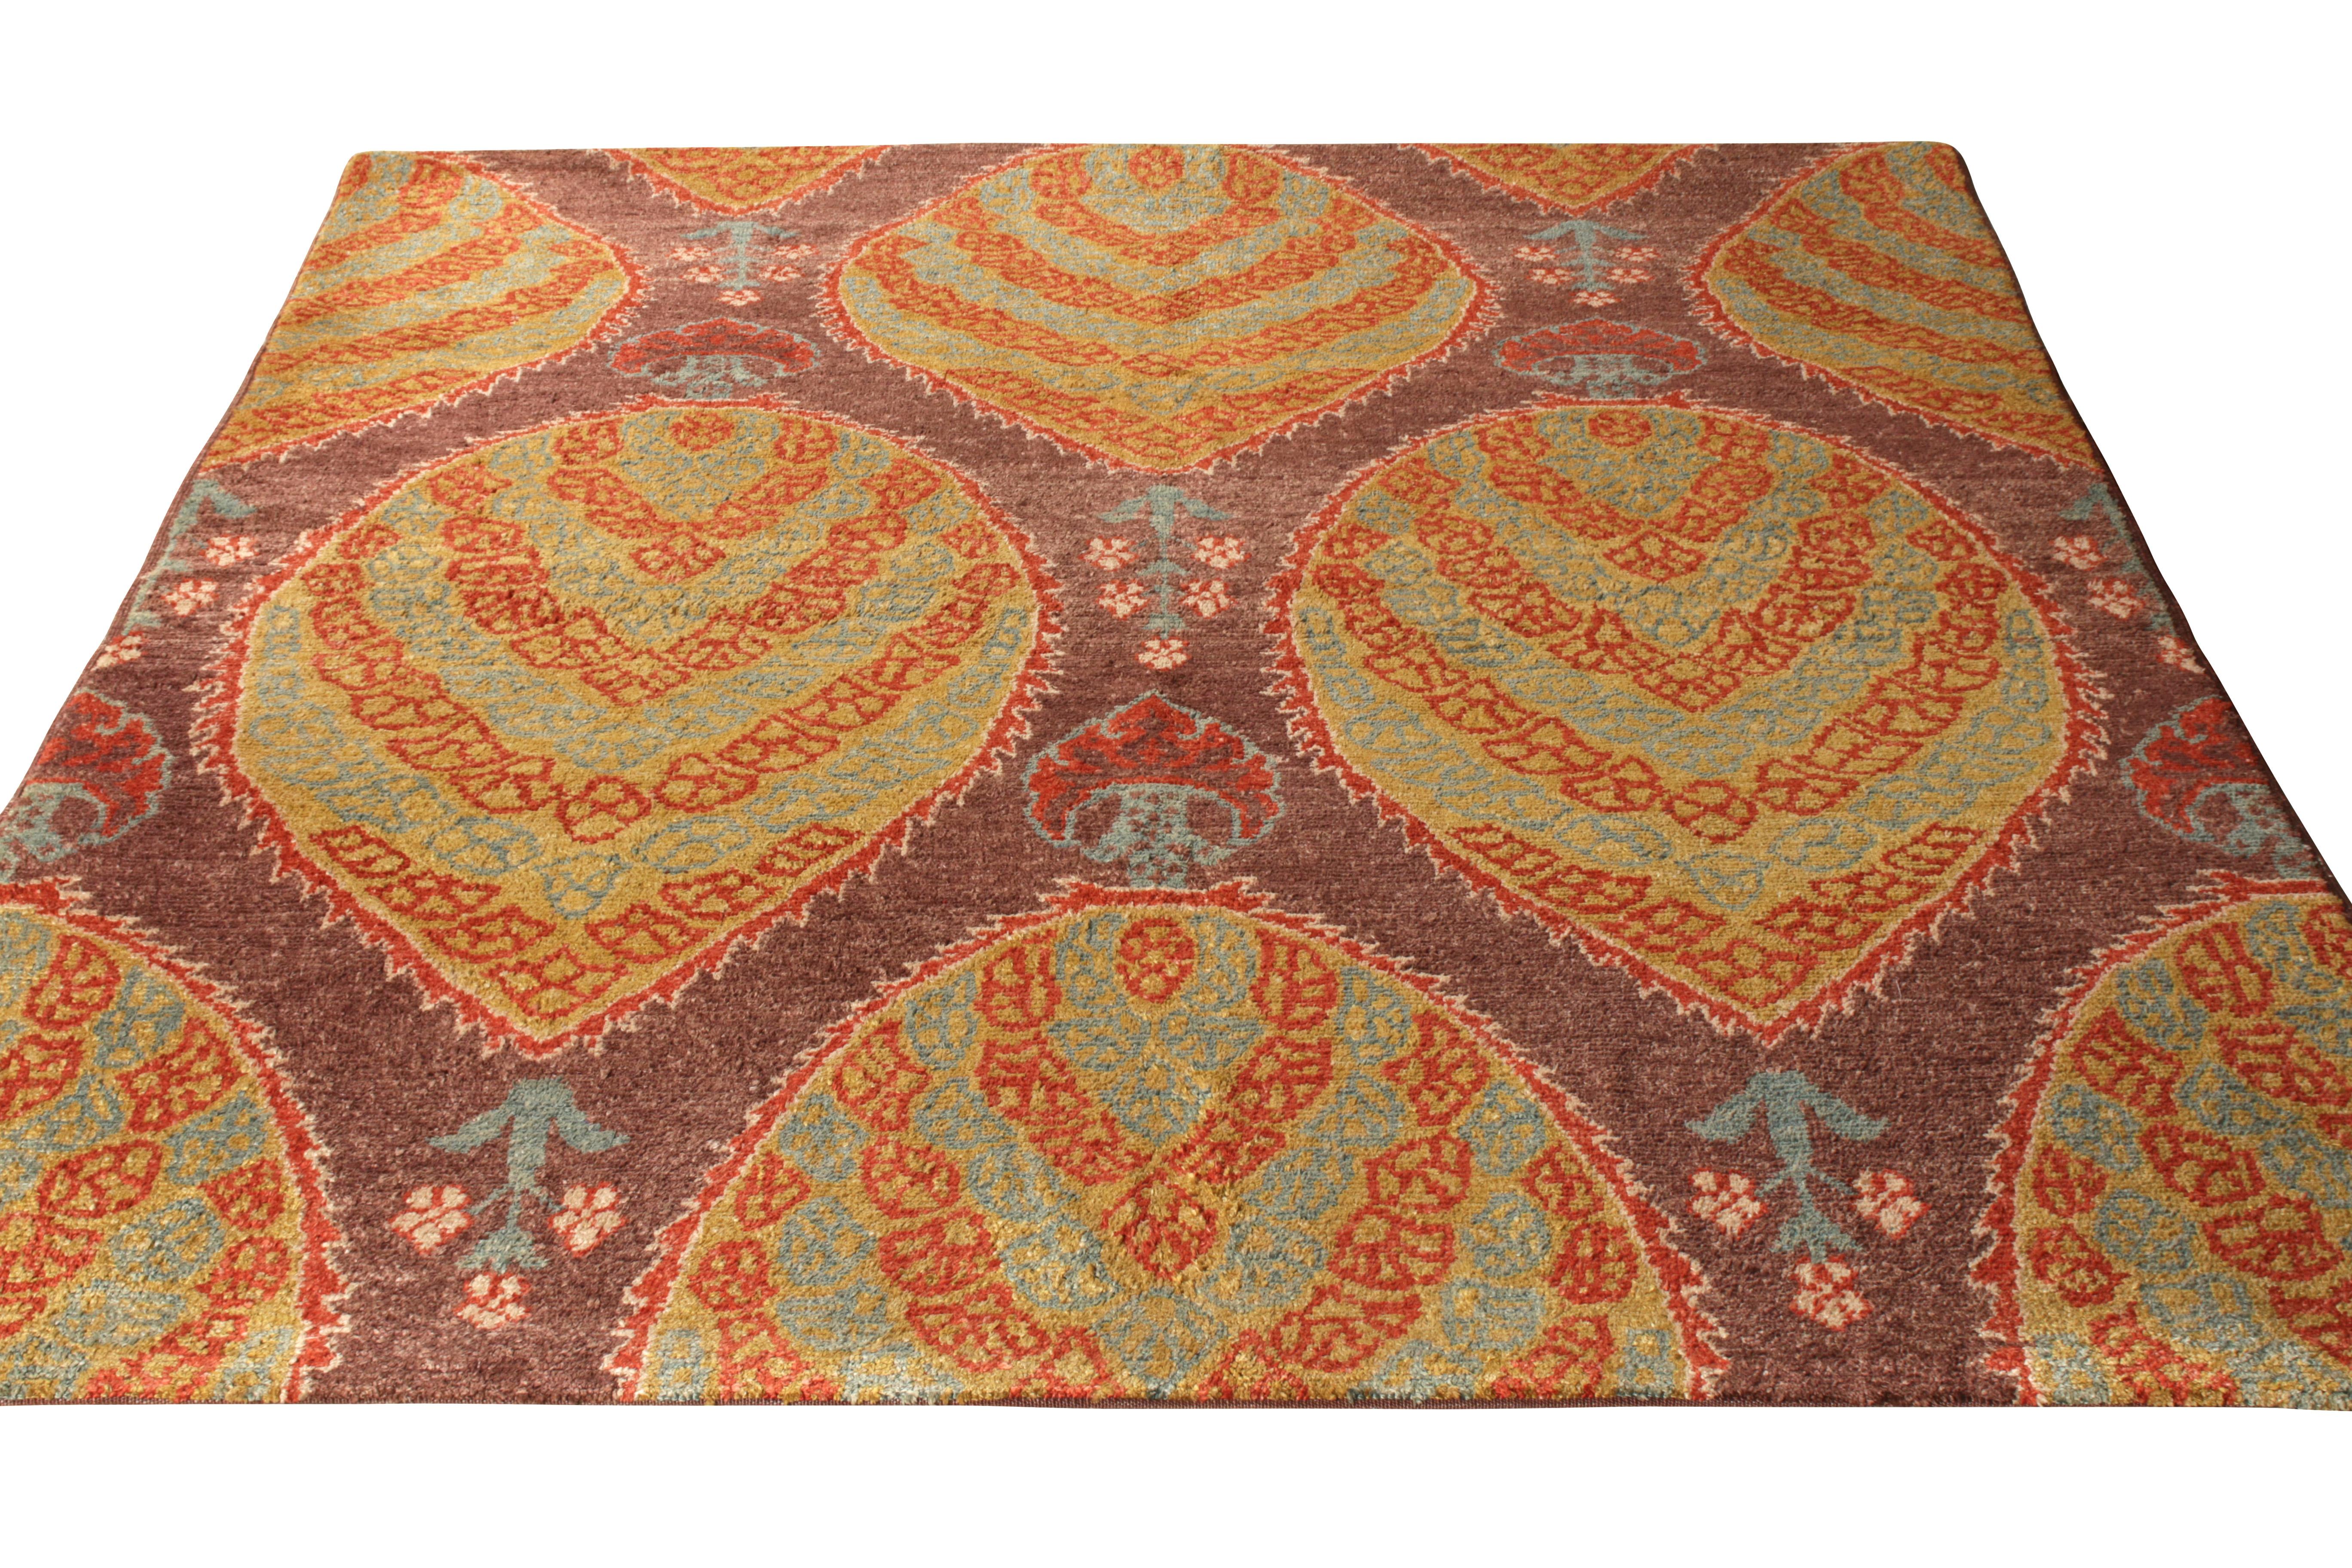 Handknotted in silk, an antique ottoman rug originating from Turkey circa 1970-1980 joining Rug & Kilim’s Antique & Vintage collection. One of George Ravmamovich’s works, the rug features an exceptional floral design that flows harmoniously with